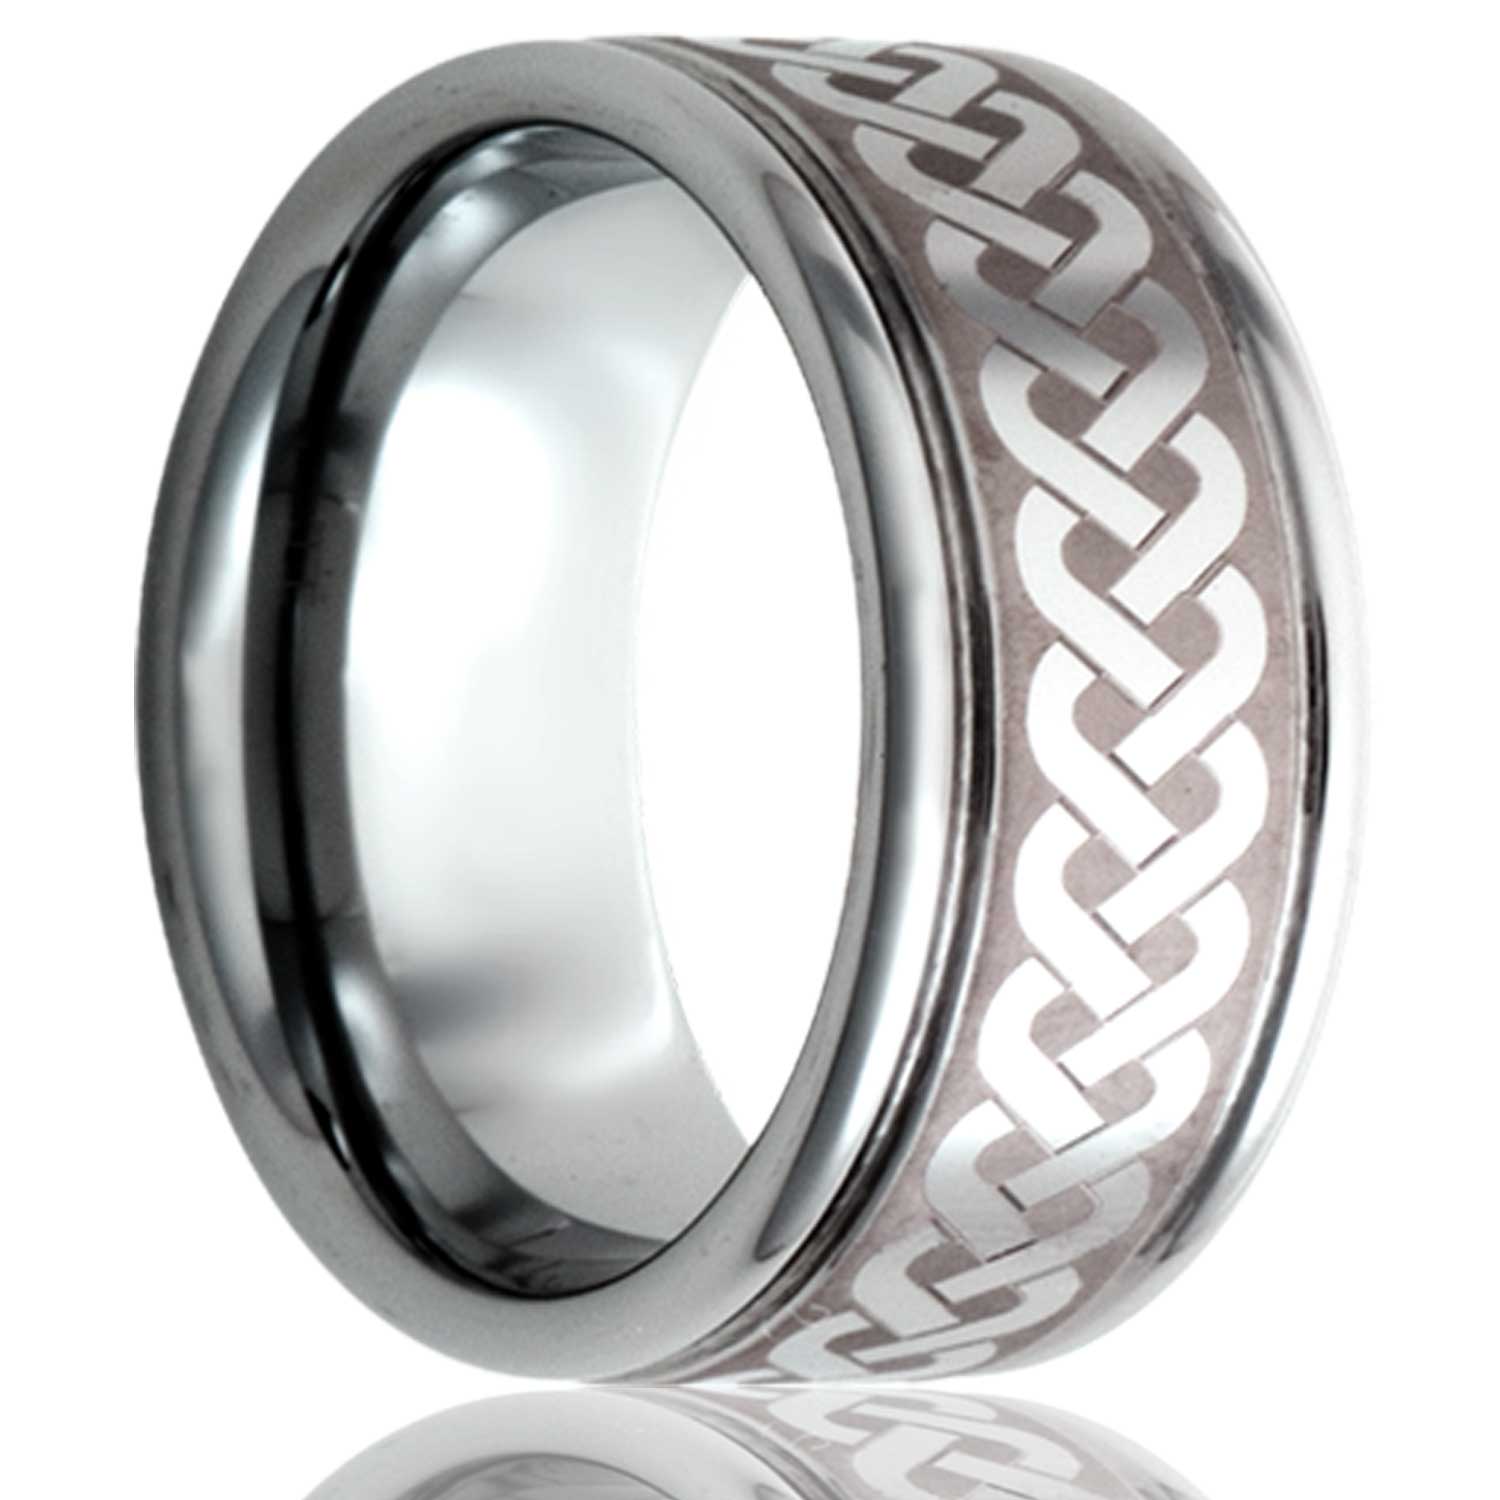 A sailor's celtic knot grooved tungsten wedding band displayed on a neutral white background.